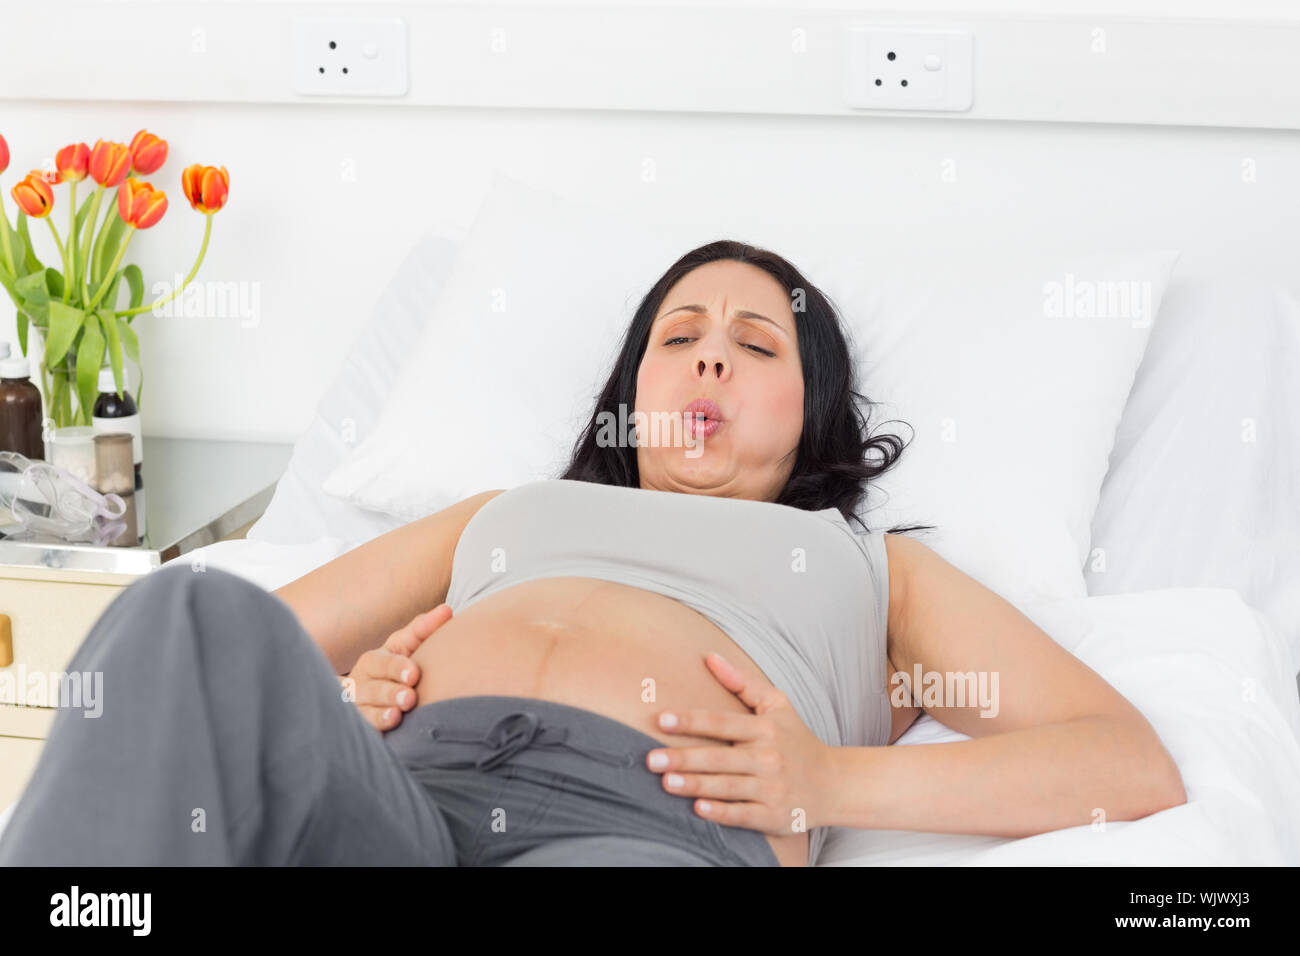 Pregnant woman suffering from labor pains lying in bed at hospital Stock Photo